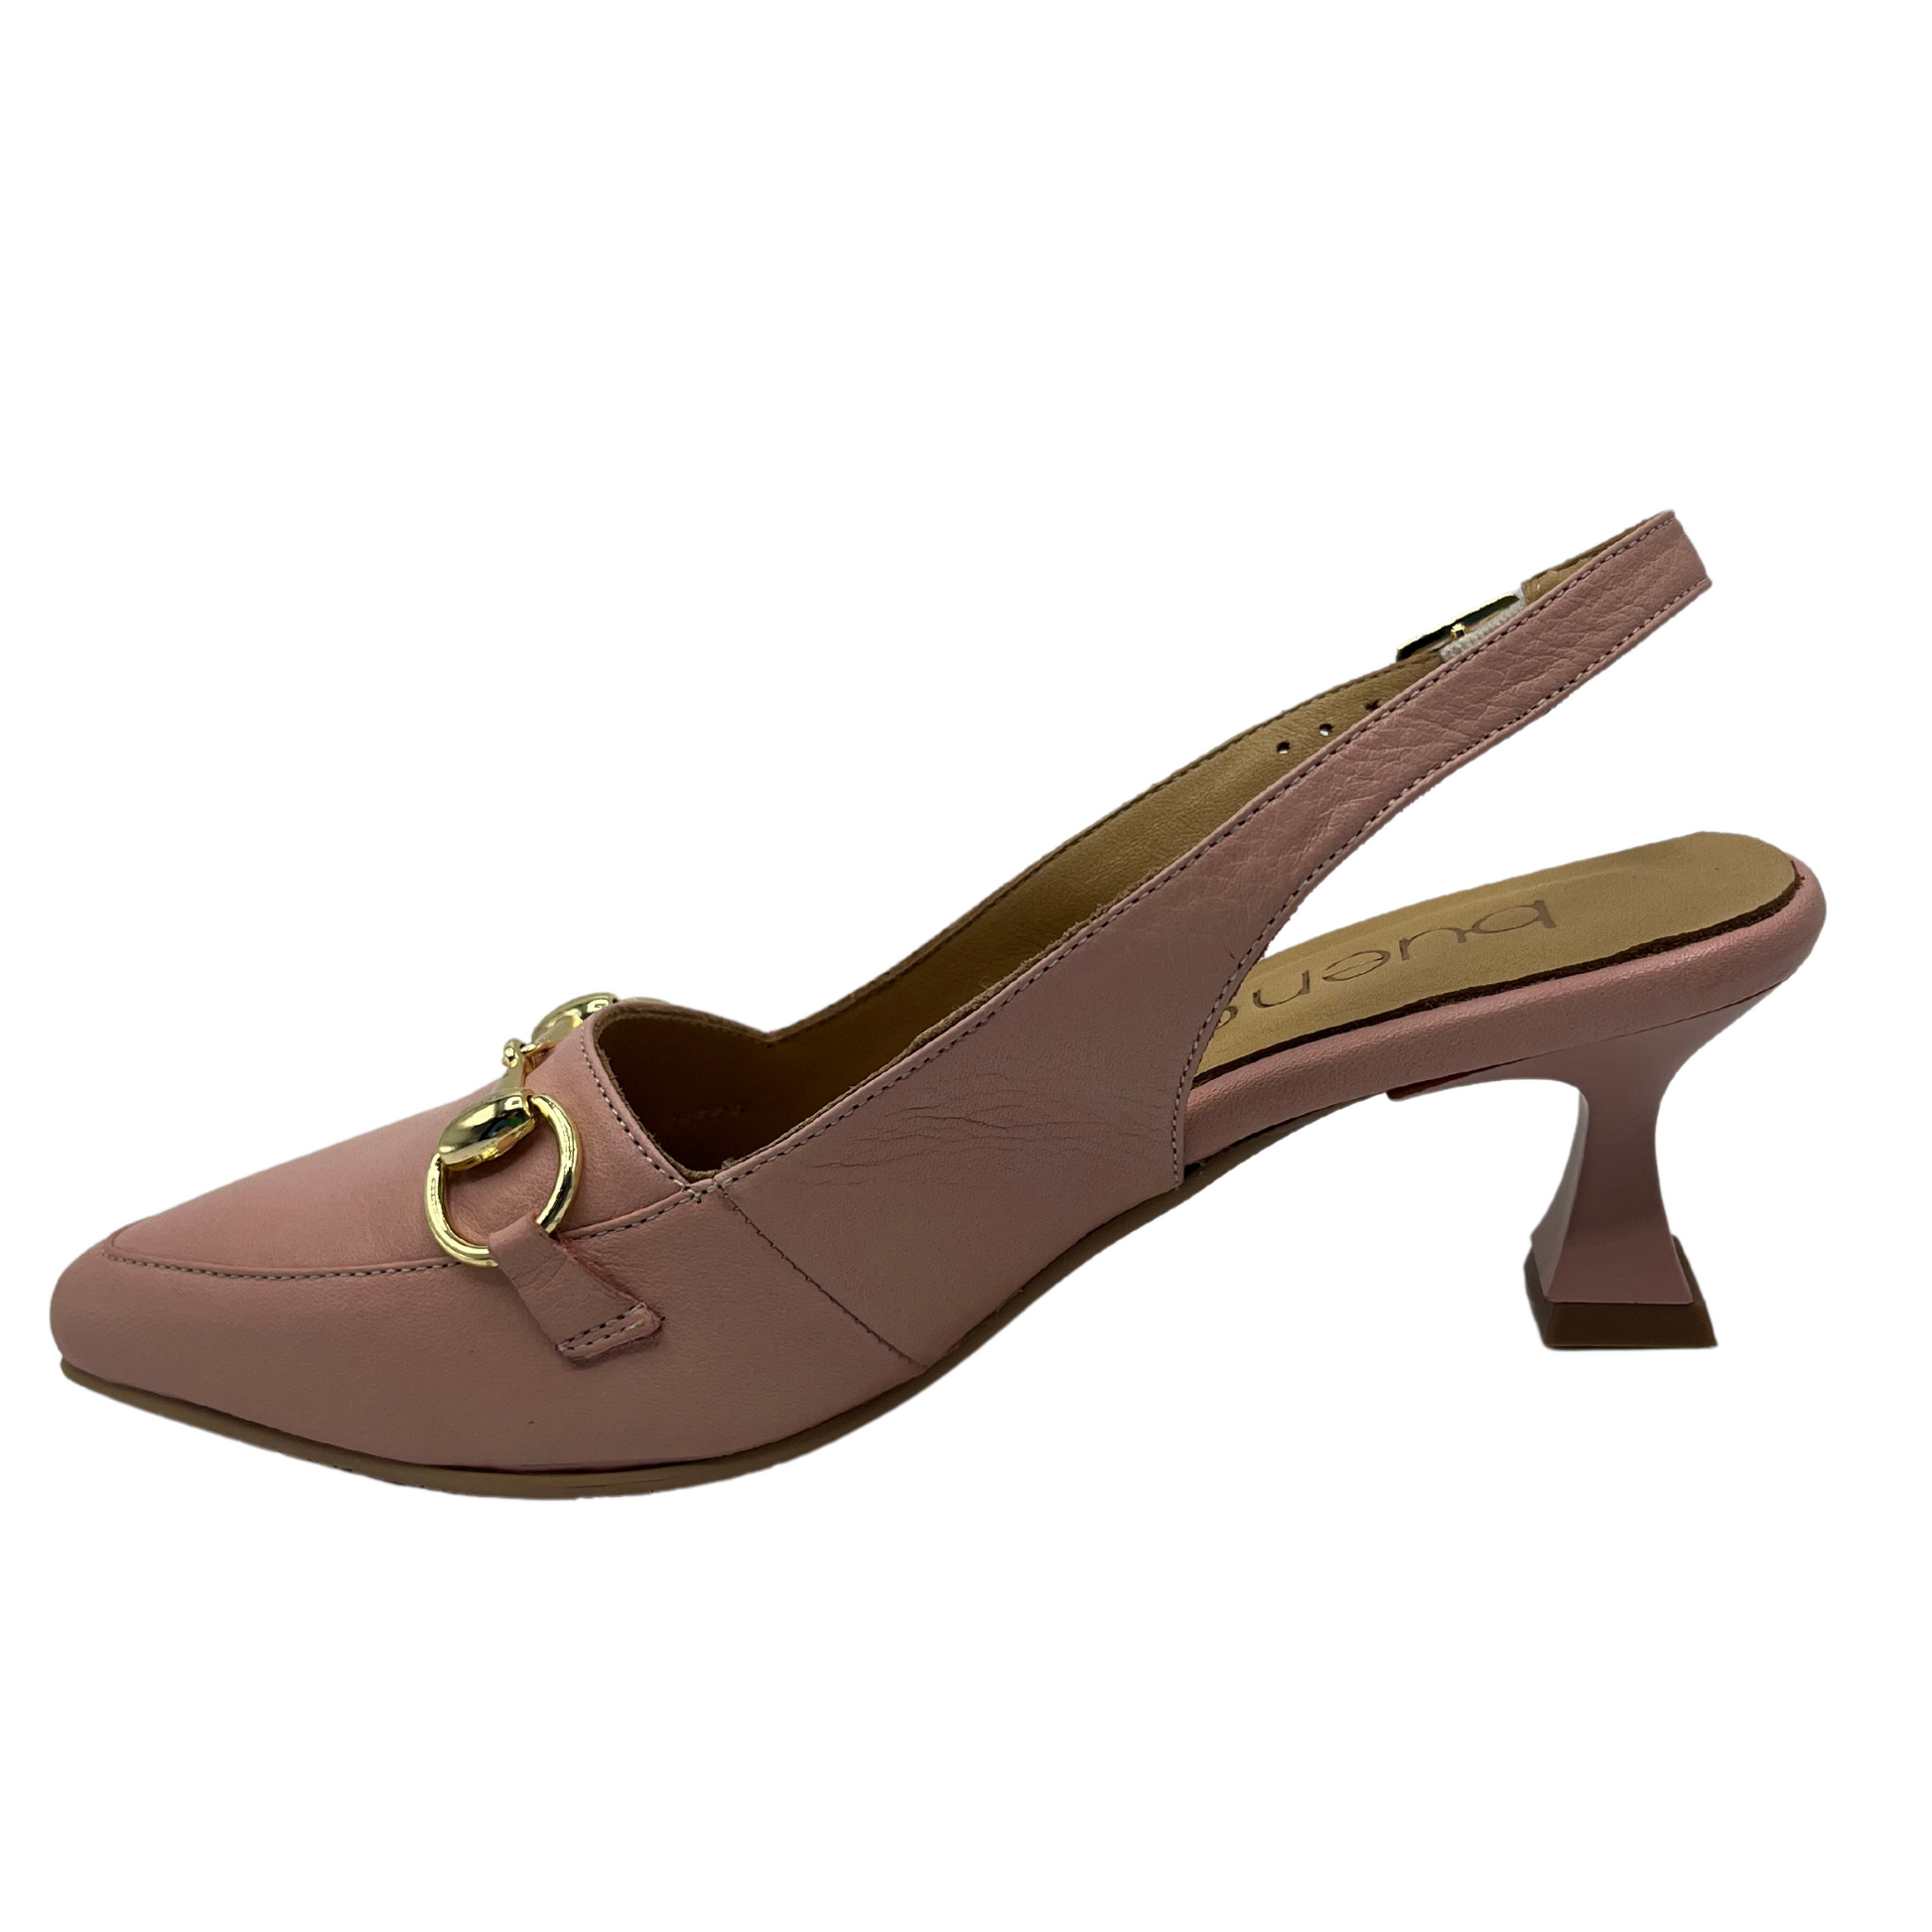 Left facing view of peach leather shoe with flared heel, slingback strap and pointed toe